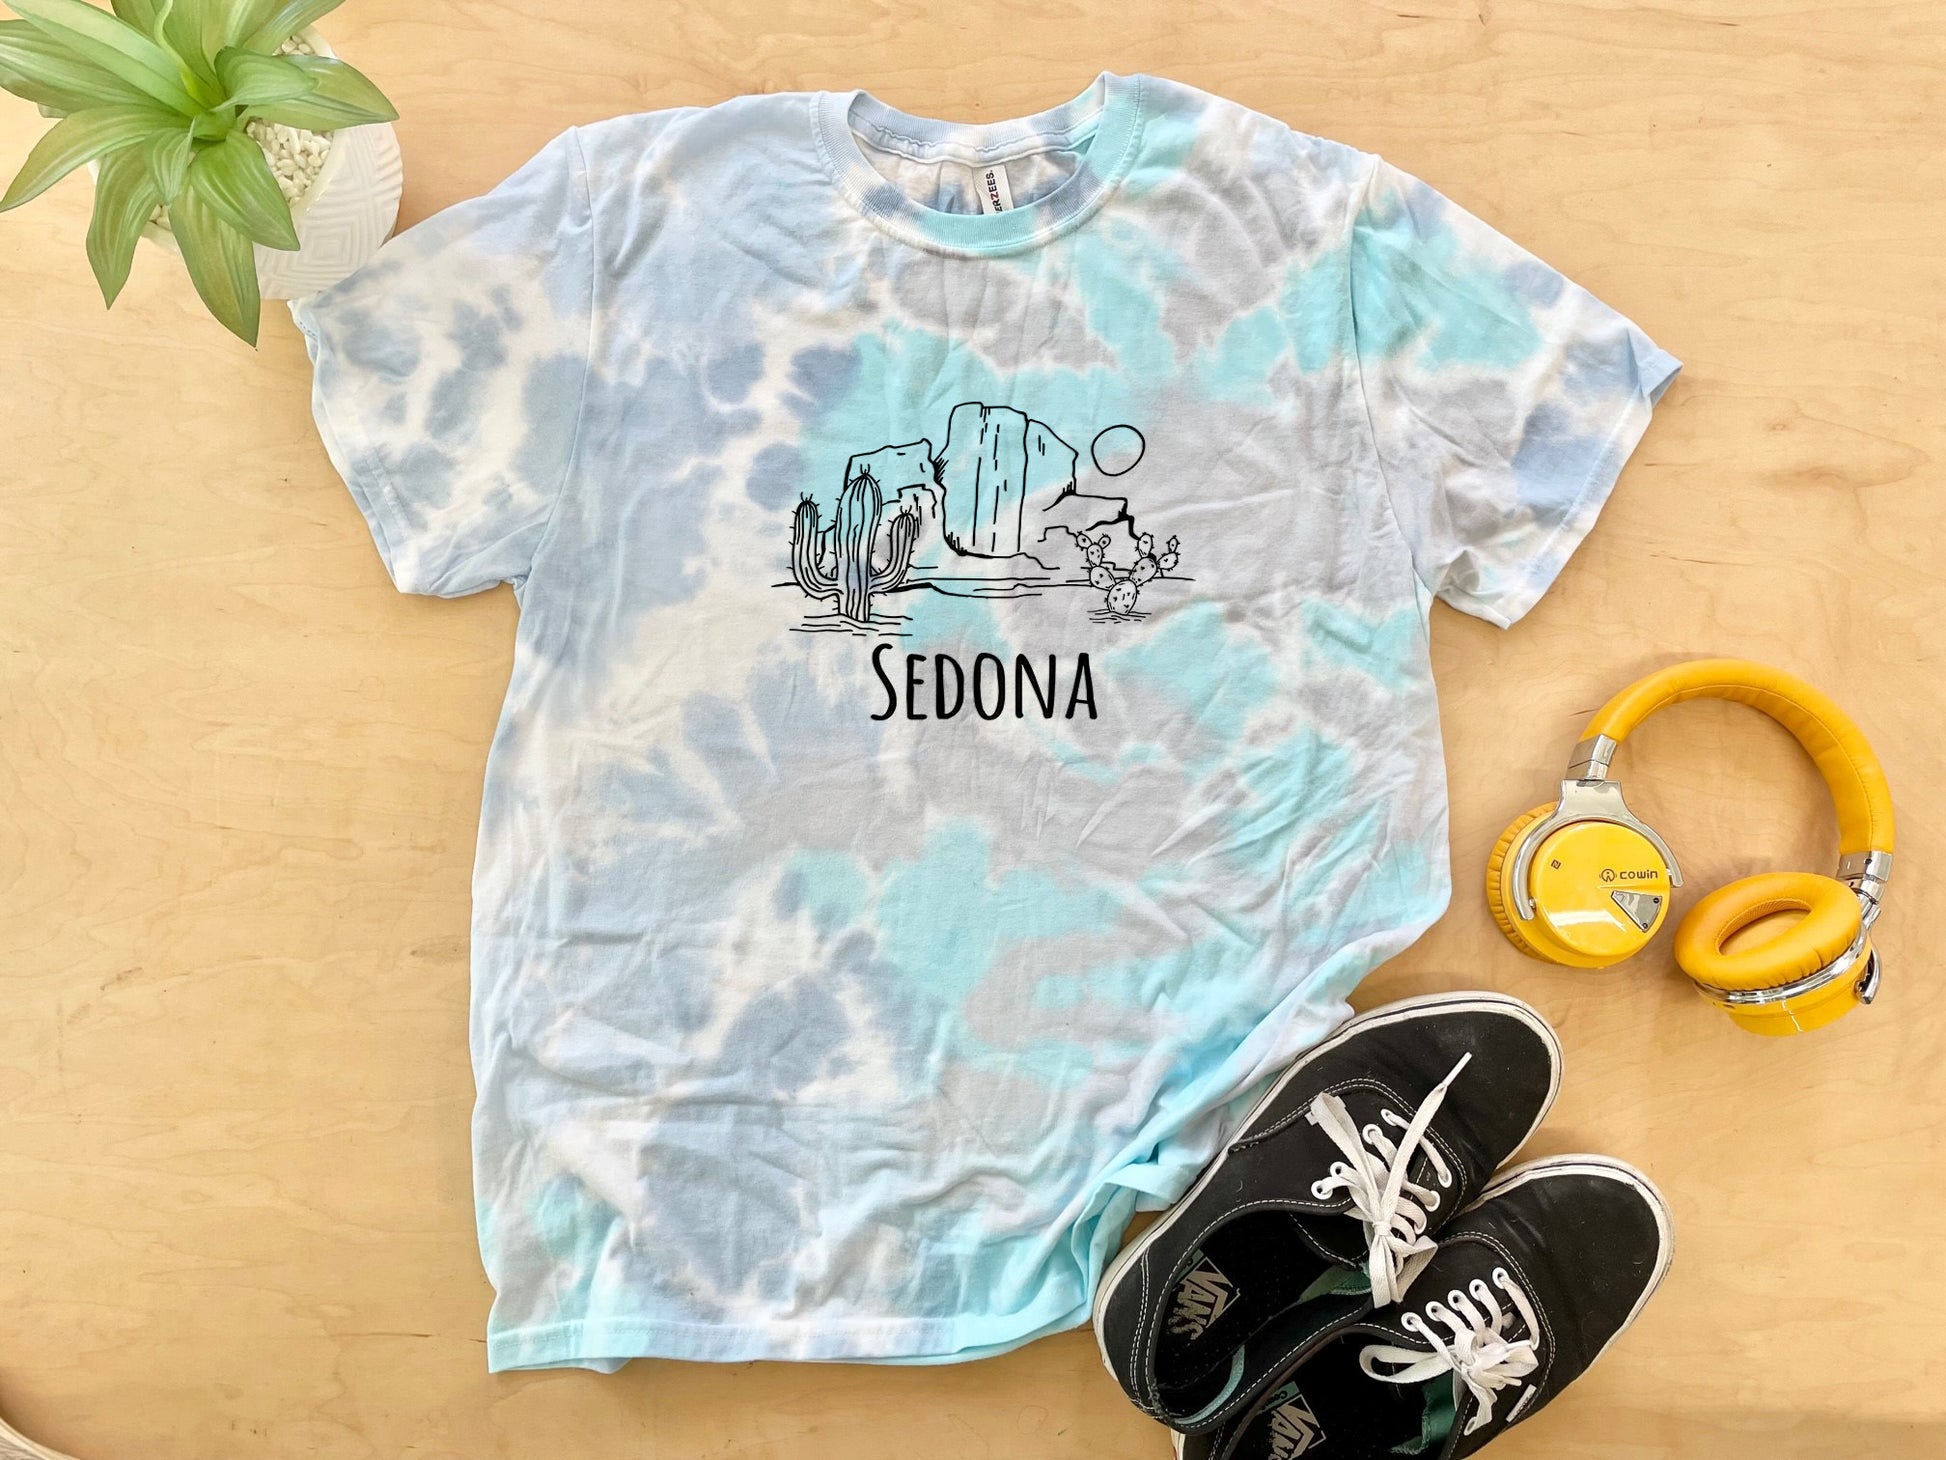 a tie dye shirt with the word sedona on it next to headphones